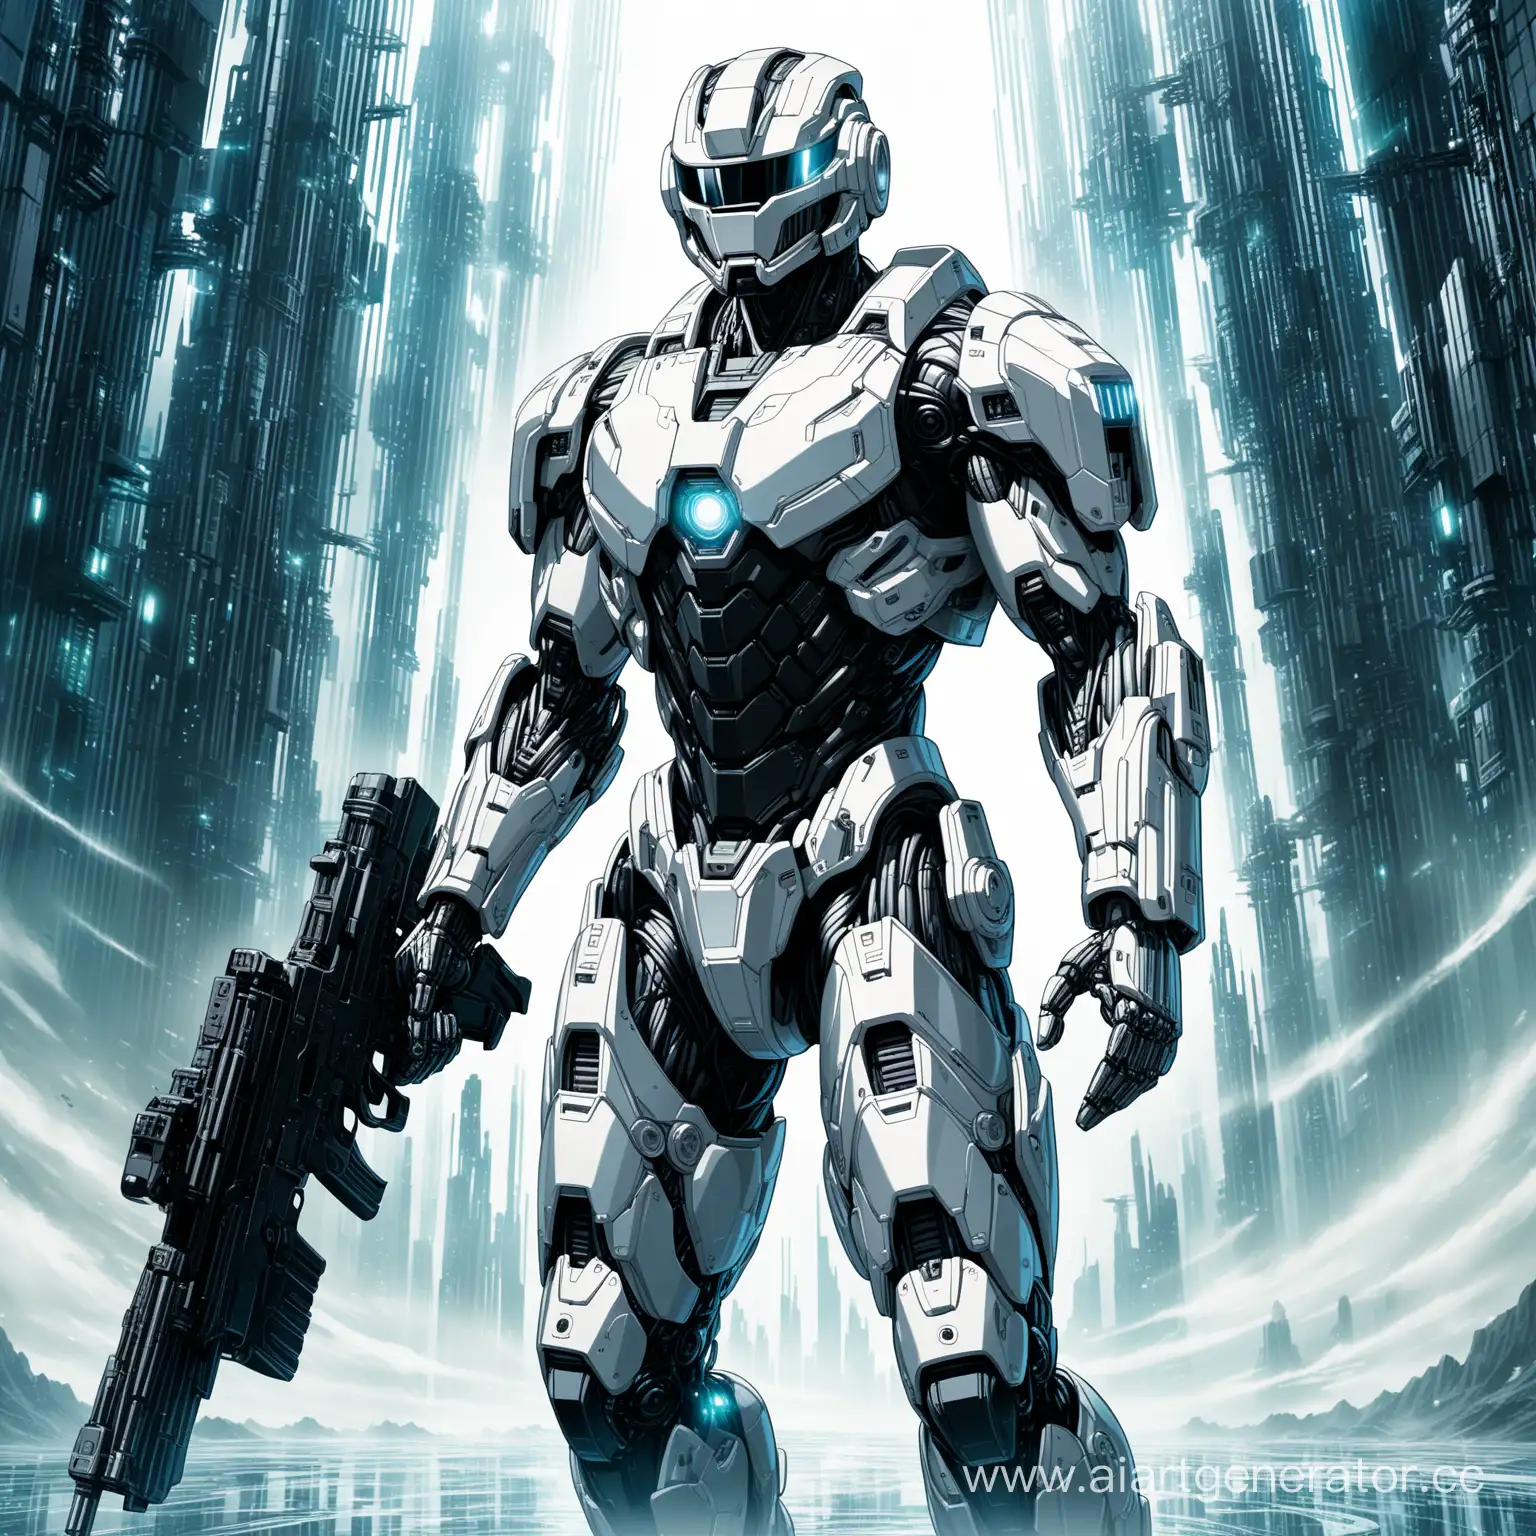 Powerful-White-Robocop-in-Advanced-Armor-with-Futuristic-Weapons